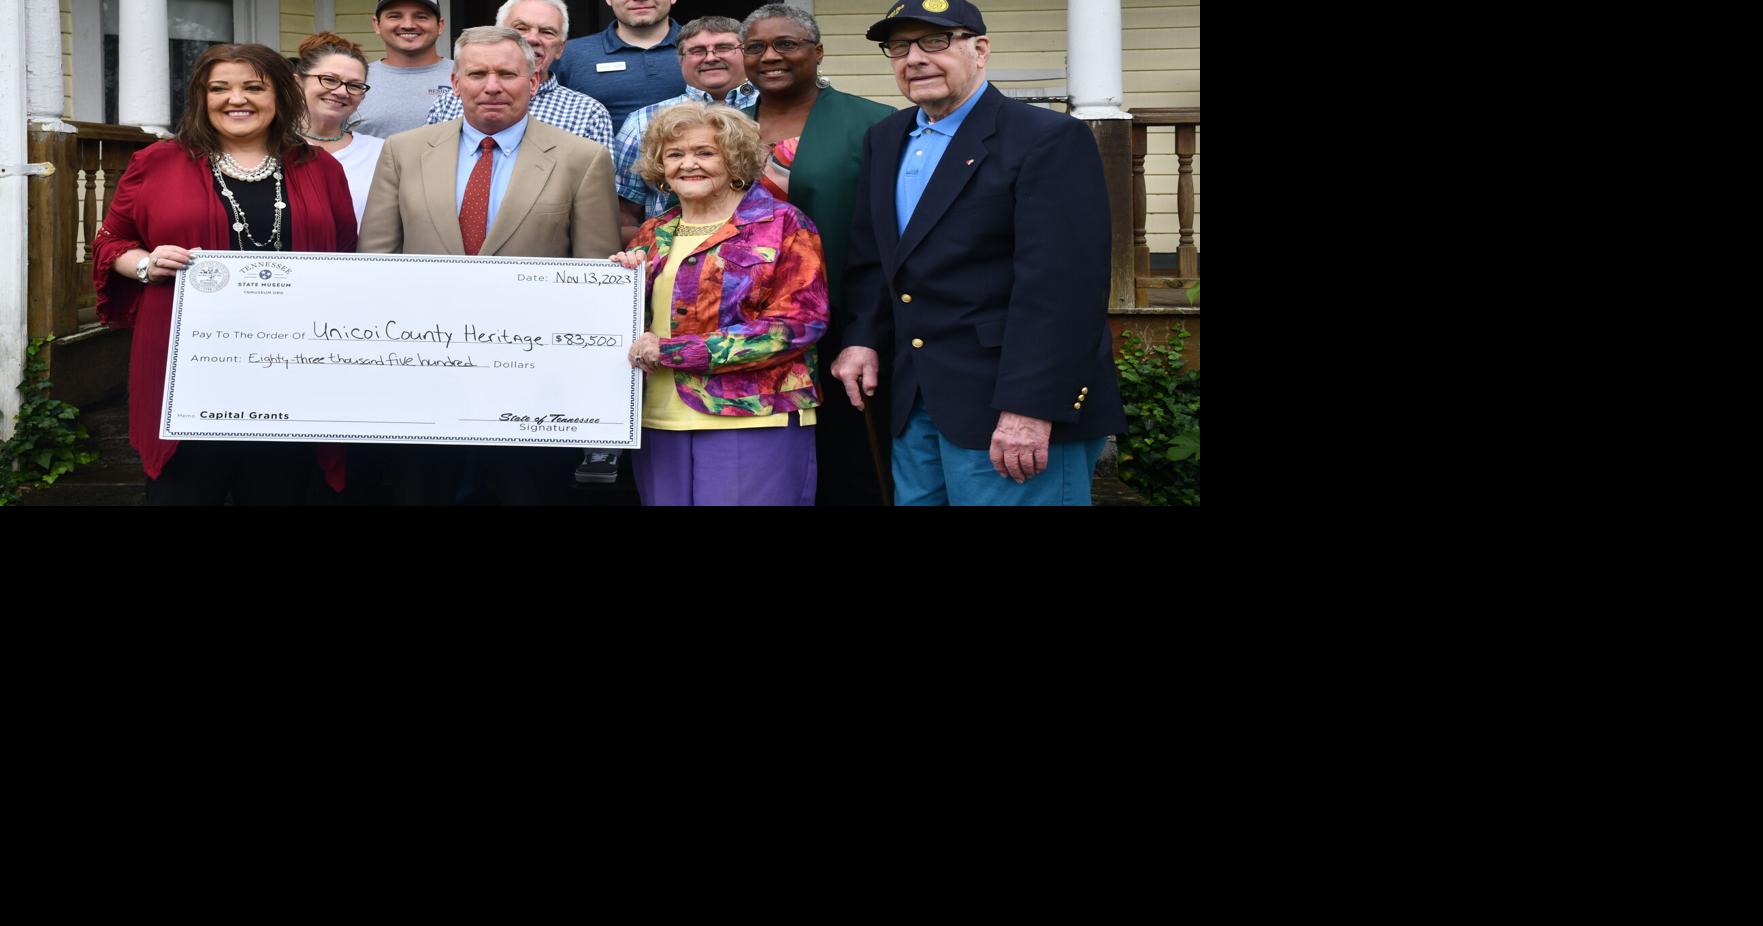 Unicoi County Heritage Museum presented with grant check for renovations